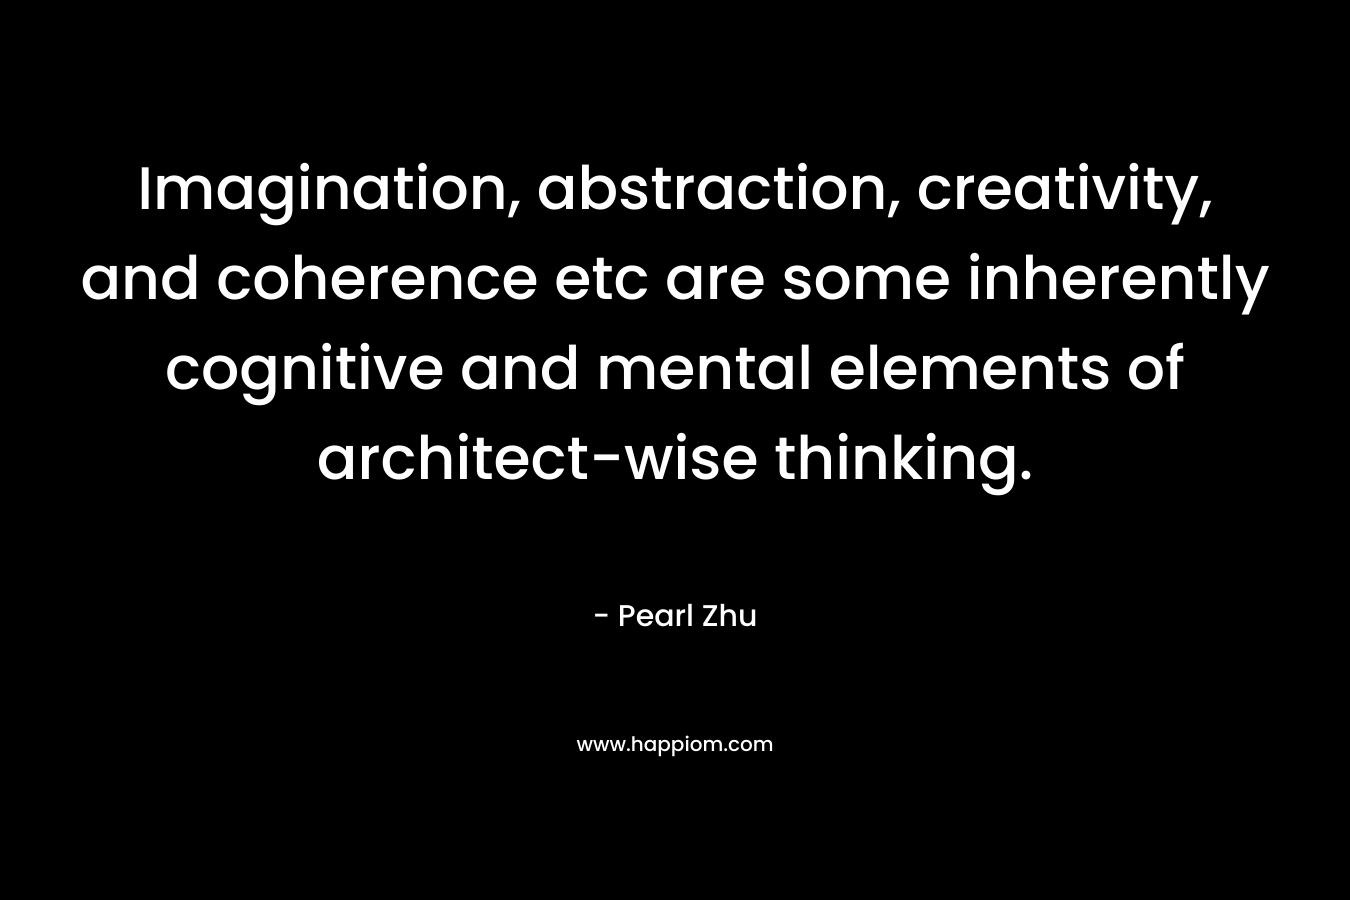 Imagination, abstraction, creativity, and coherence etc are some inherently cognitive and mental elements of architect-wise thinking.